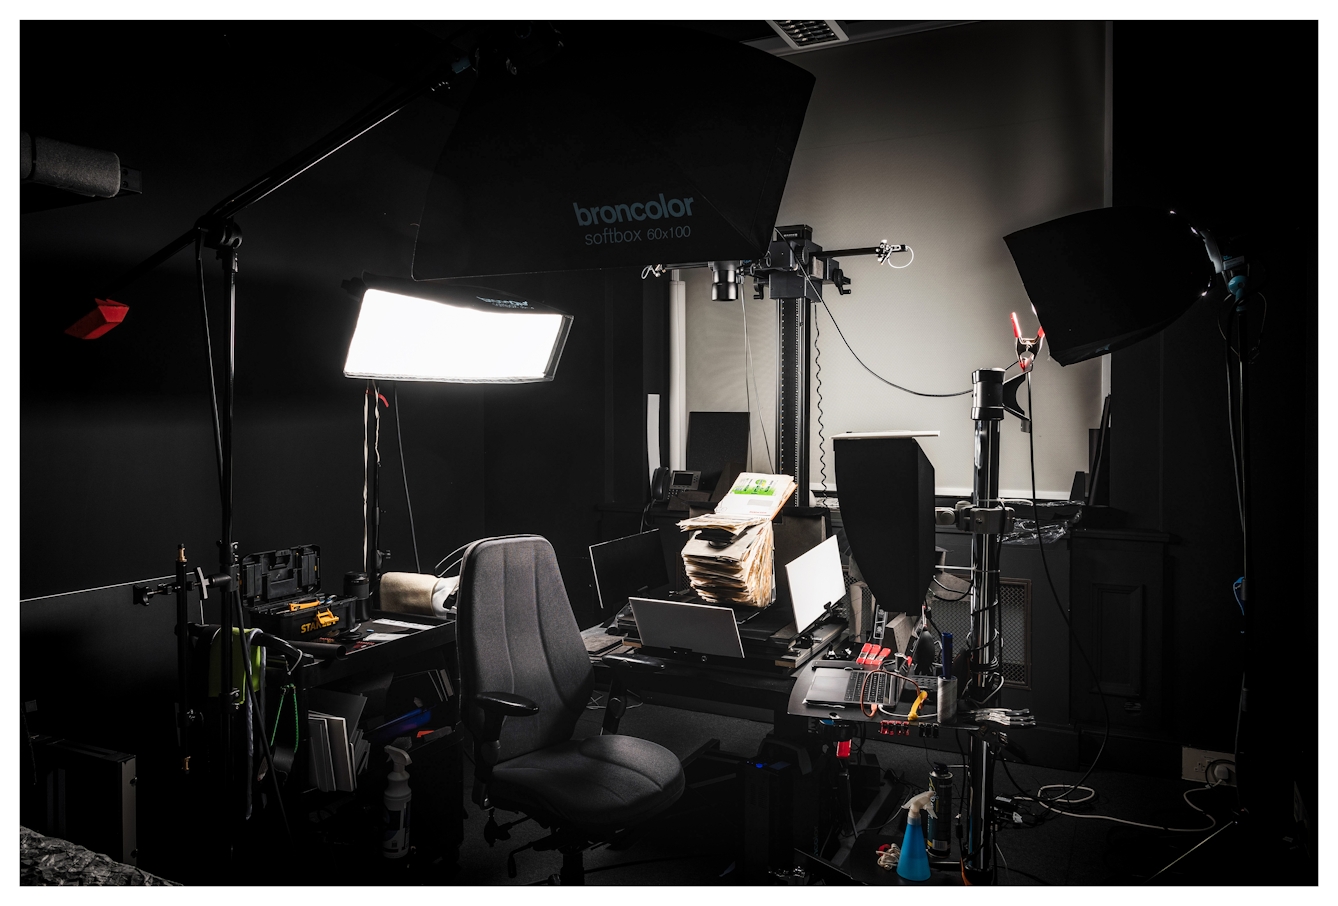 Wide angle photograph of a dark photographic studio. In the centre of the image is an open scrapbook positioned on a table underneath a camera which is mounted vertically above it. Around the scrapbook is a trolley with a laptop and a display, 3 large studio lights and another trolley containing various accessories. The room has an atmospheric feel, all dark except for a pool of light in the centre, spotlighting the scrapbook.